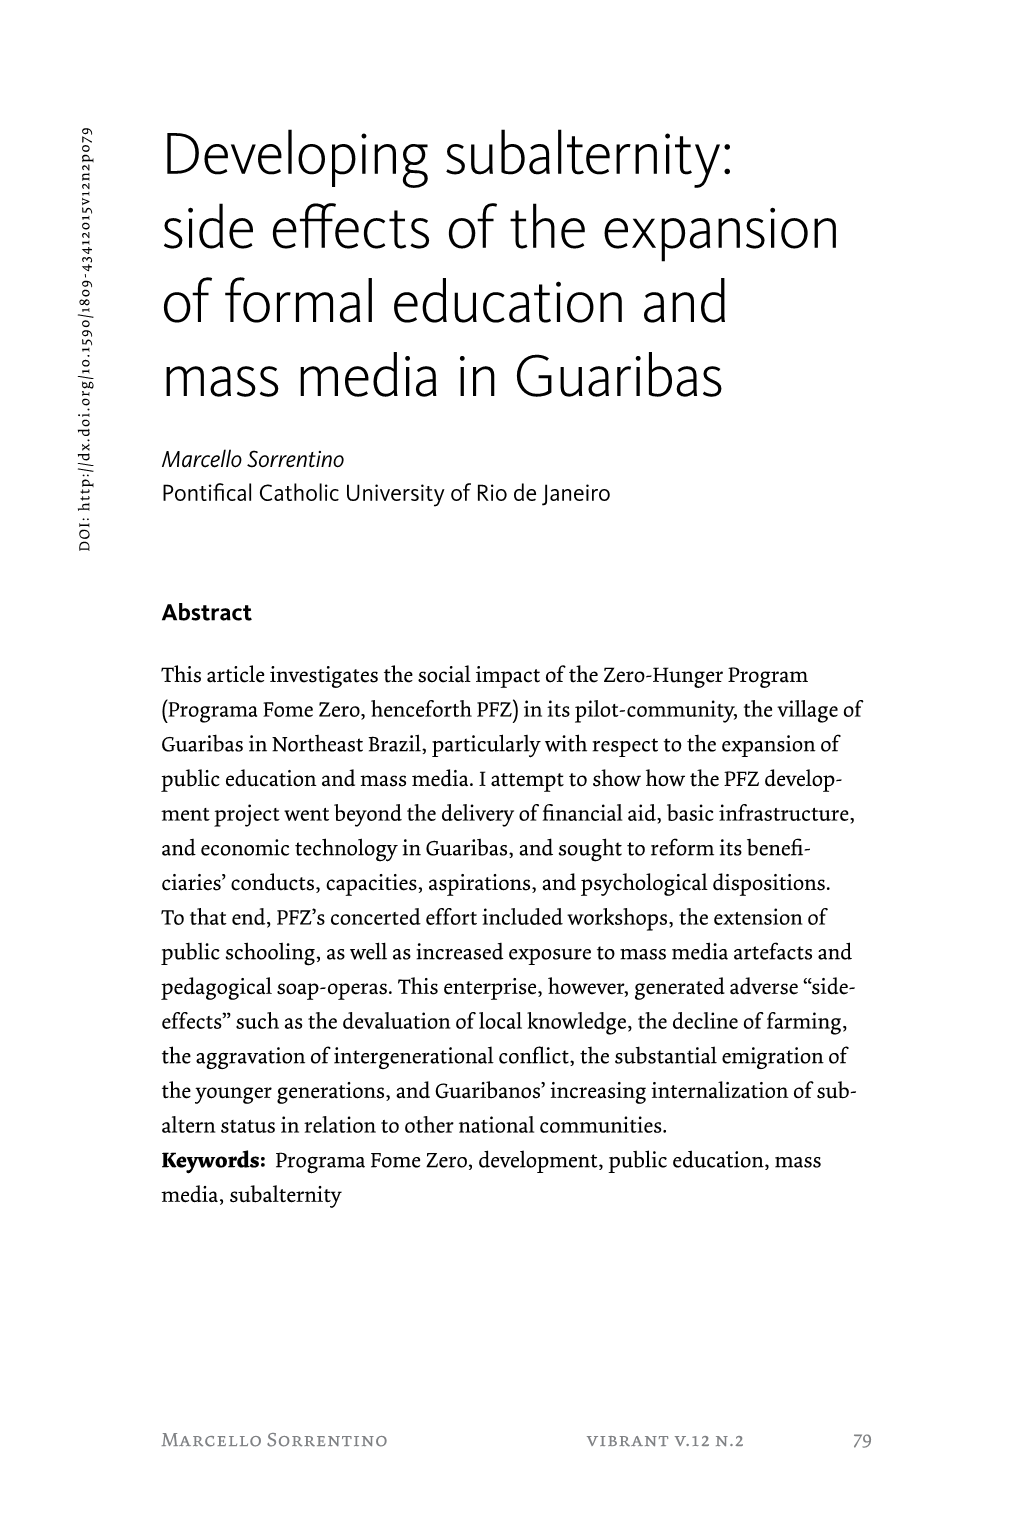 Side Effects of the Expansion of Formal Education and Mass Media in Guaribas